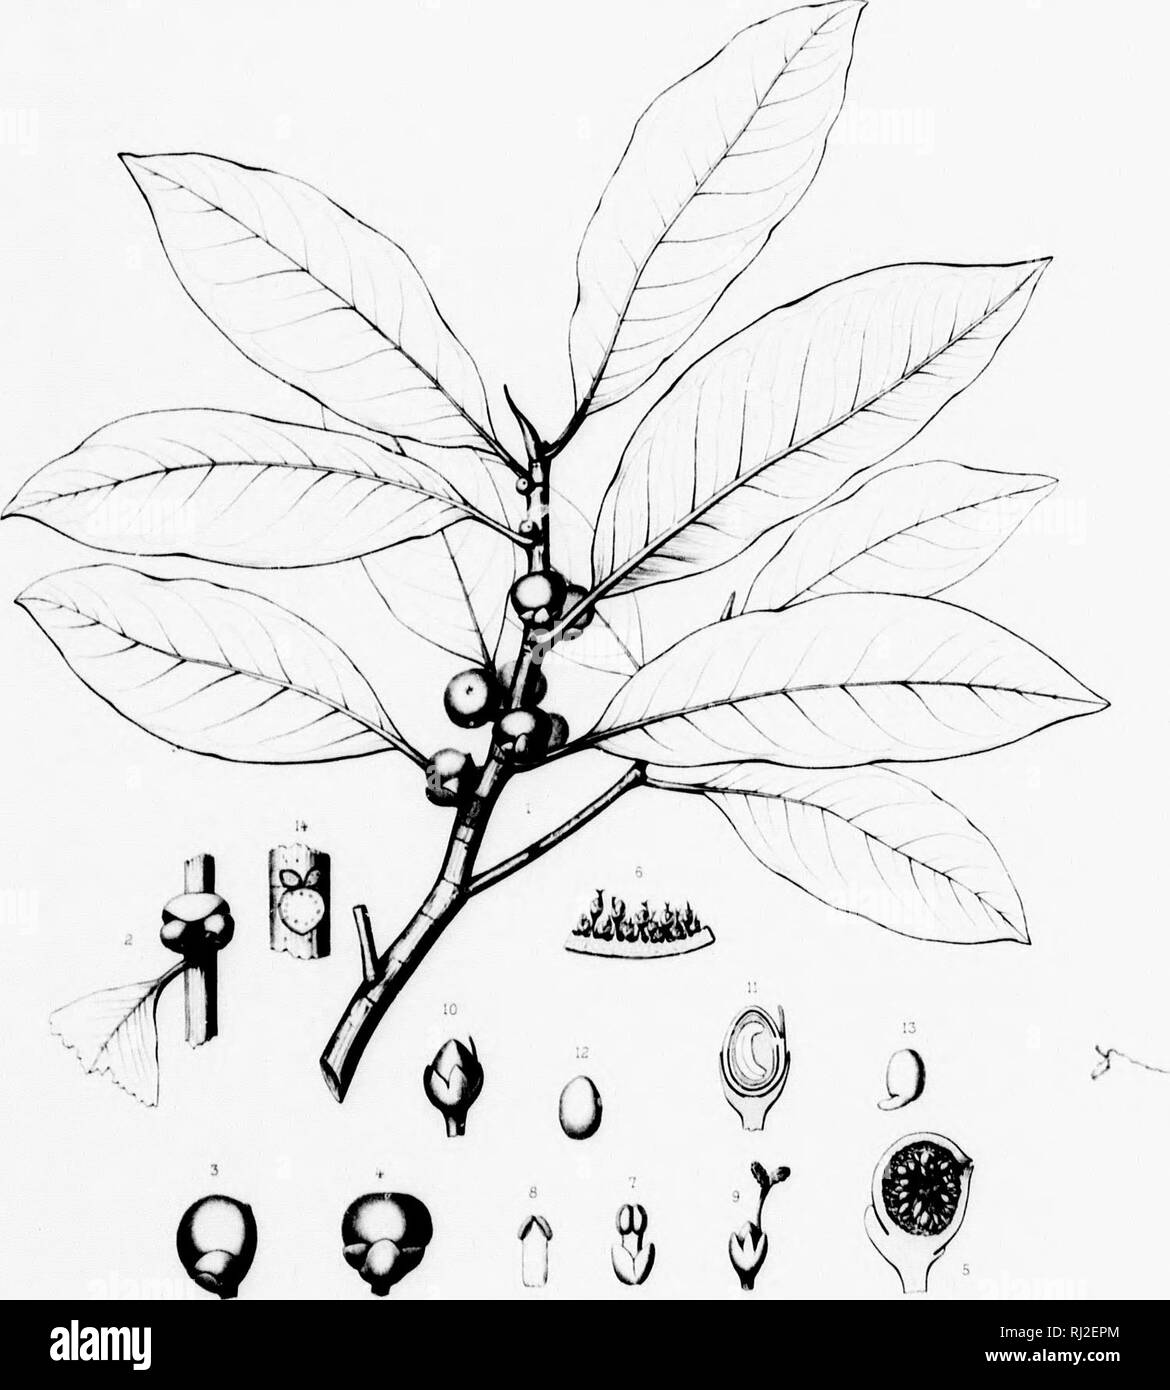 . The silva of North America [microform] : a description of the tree which grow naturally in North America exclusive of Mexico. Trees; Trees; Dicotyledons; Arbres; Arbres; DicotylÃ©dones. M IK t jhliorlidit., 'â i^ (â¢ rislinlili; rtn(] ctiiitikiii^ el^' iln- wood / hridu* V bÂ«en inlro- â 'H^ inland, i^ 3ilva of North Aniencd Tab. CCCXXIV.. A' J'.i^nm J*^ Hu'ieii^ JC. Ficus AUREA, :; A Jiuw â â¢w^r .urtr ' /â¢&quot;y . ' Ij/}rur ,'irw i| t â¢ } :l- I â¢ if m k r. Please note that these images are extracted from scanned page images that may have been digitally enhanced for readability -  Stock Photo